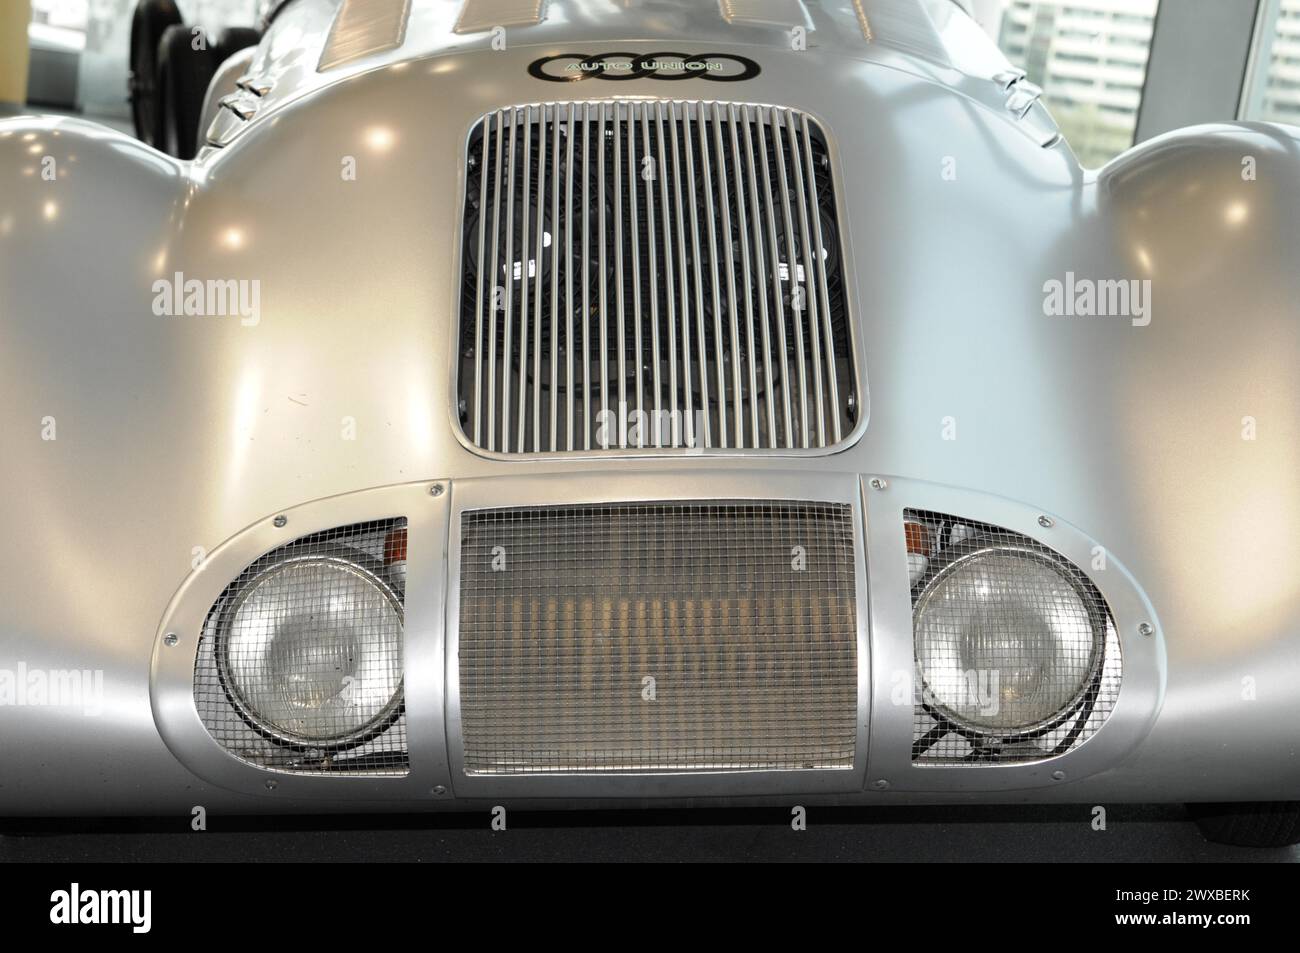 Museum mobile, Audi Museum, The detailed front view of a silver Audi vintage racing car, Museum mobile, Audi Museum, Audi, Ingolstadt, Bavaria Stock Photo